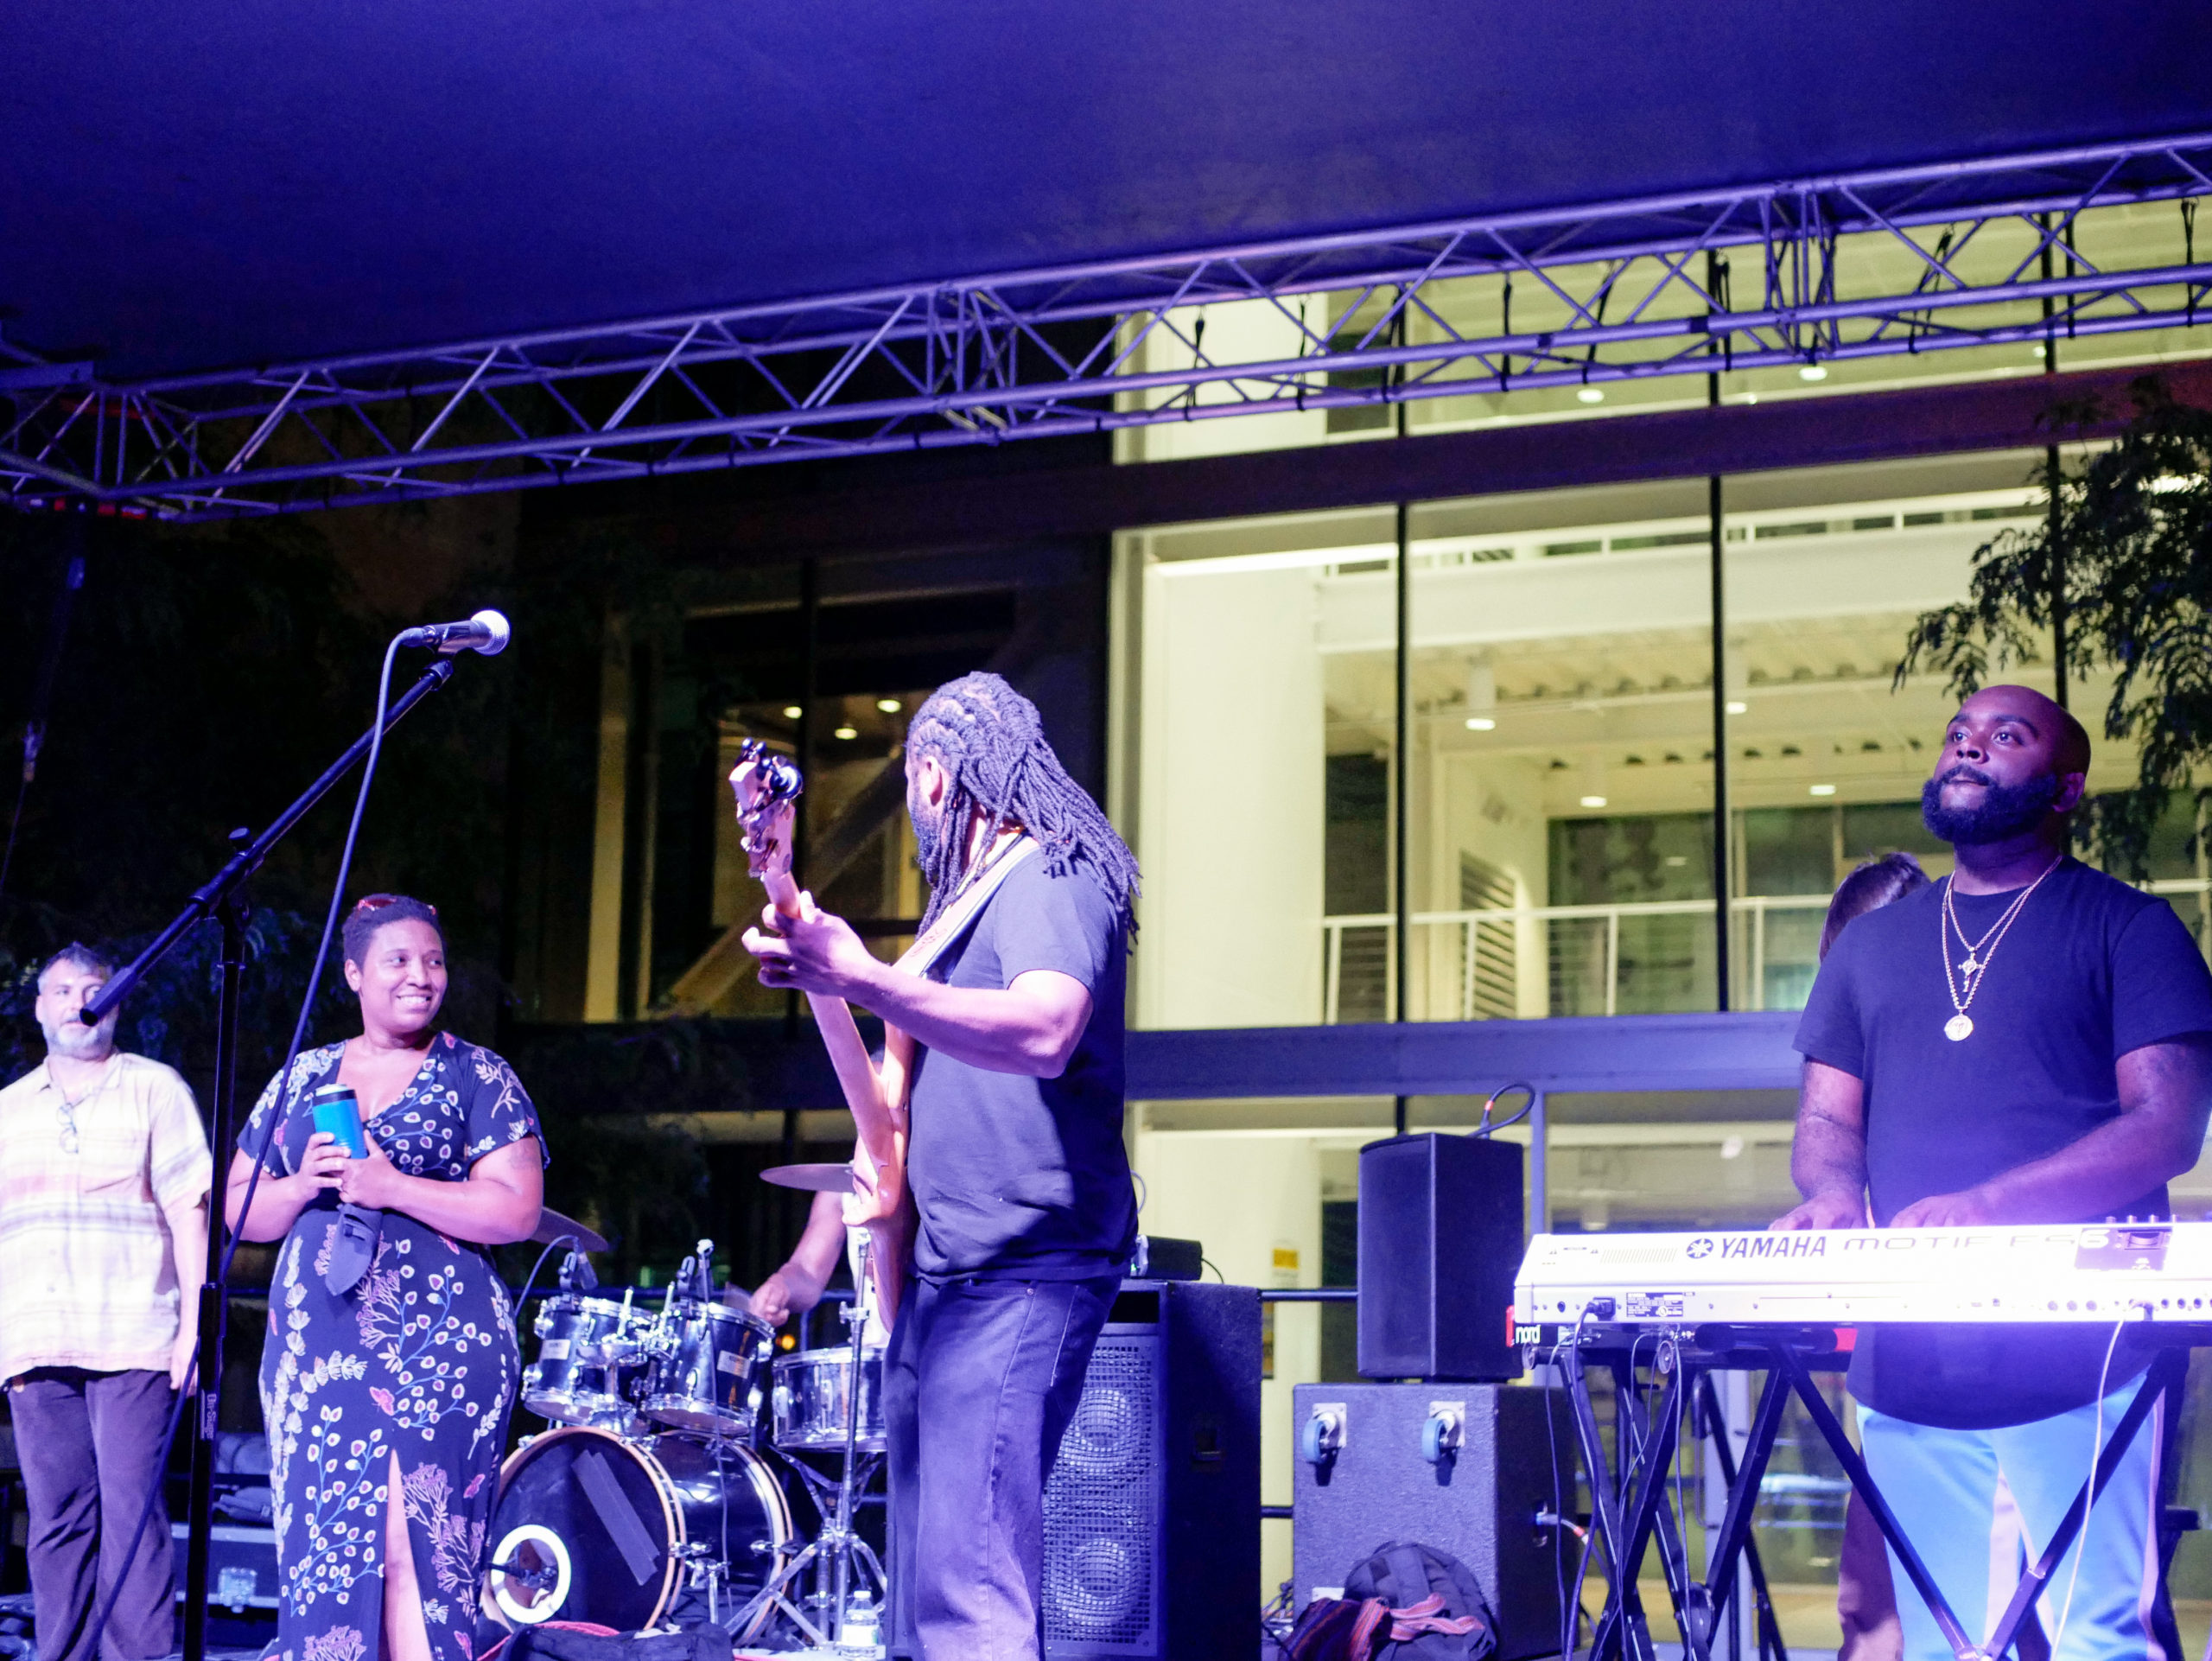 Joe Marcinek Band performs in the River Music Experience courtyard during Alternating Currents.